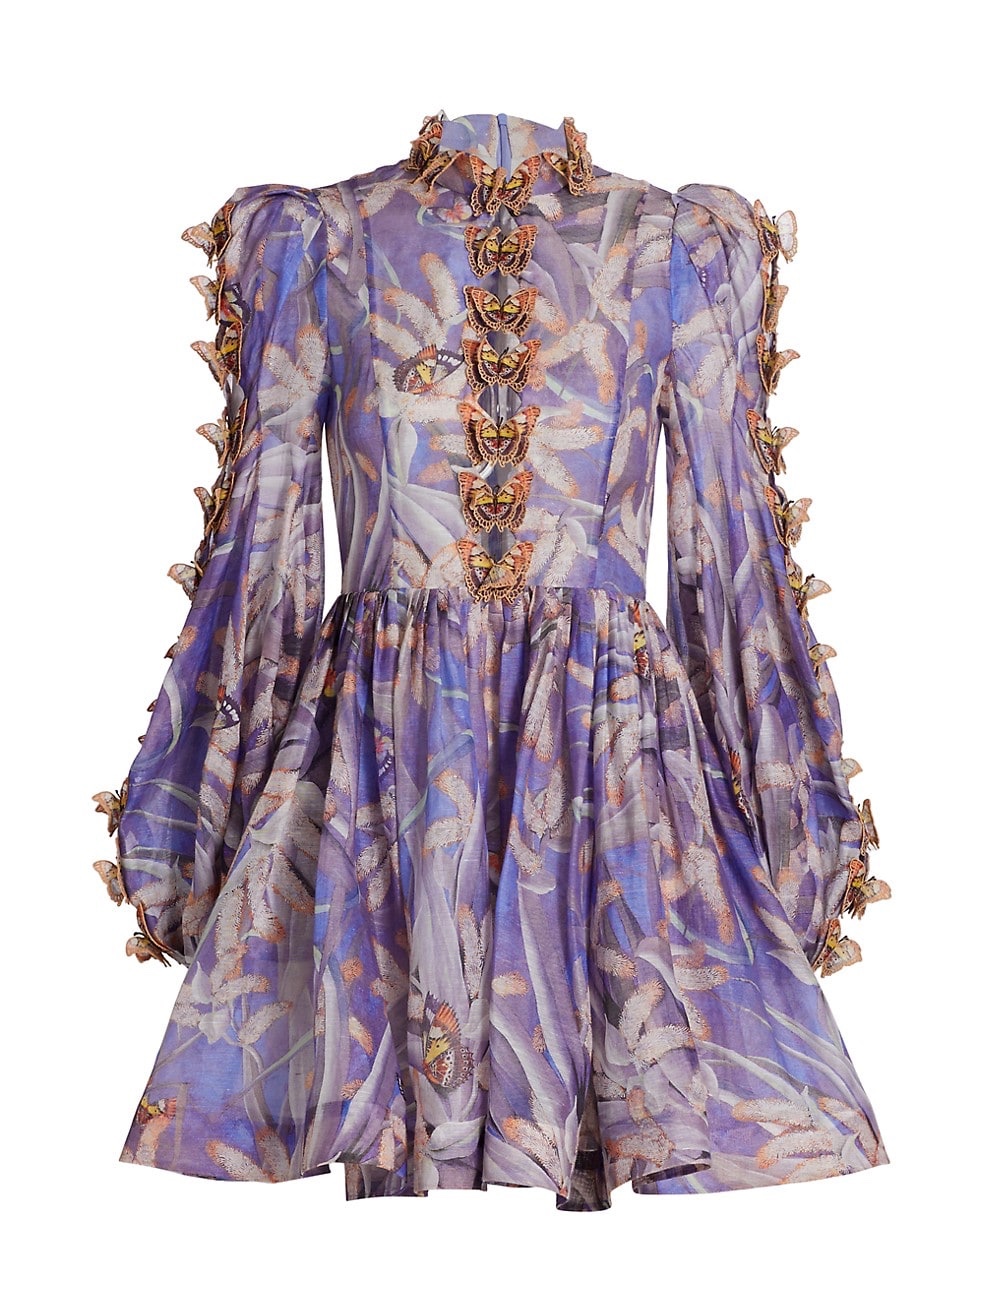 2021 popular logo spring/summer catwalk show, Australia, flax printed butterfly dress with high waist, bubble sleeve and standing collar от DHgate WW